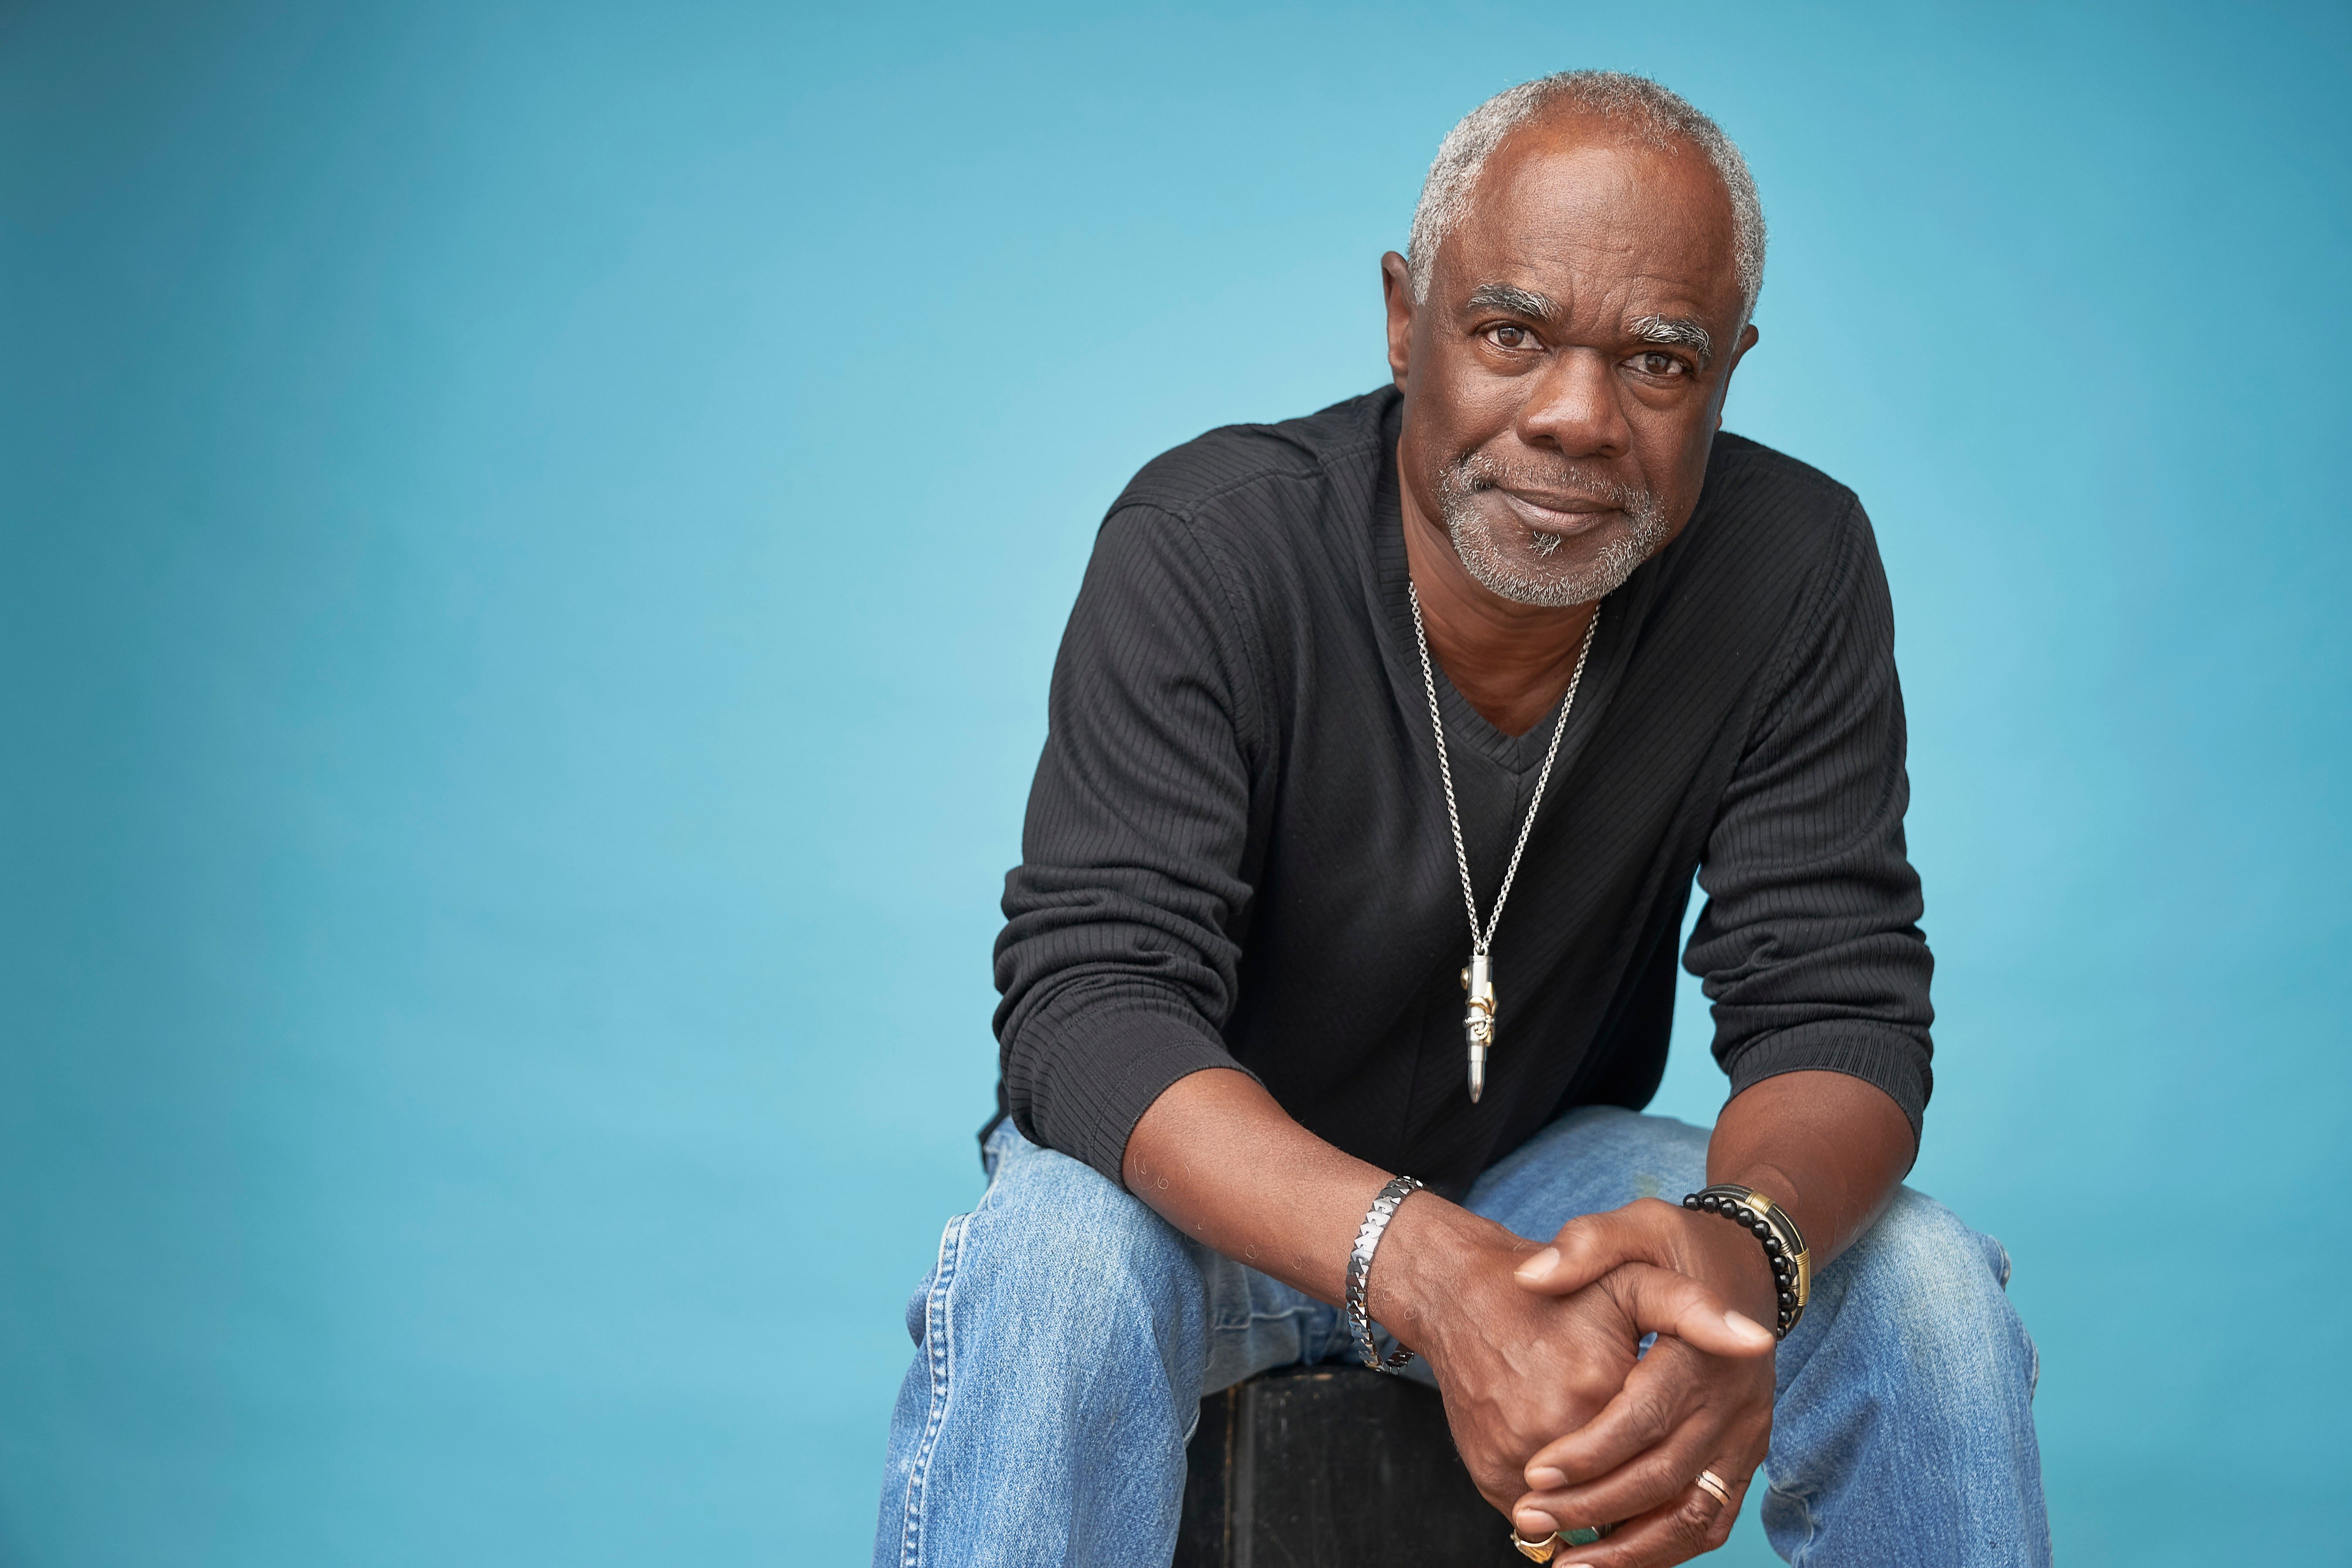 Glynn Turman looking into the camera with his hands together